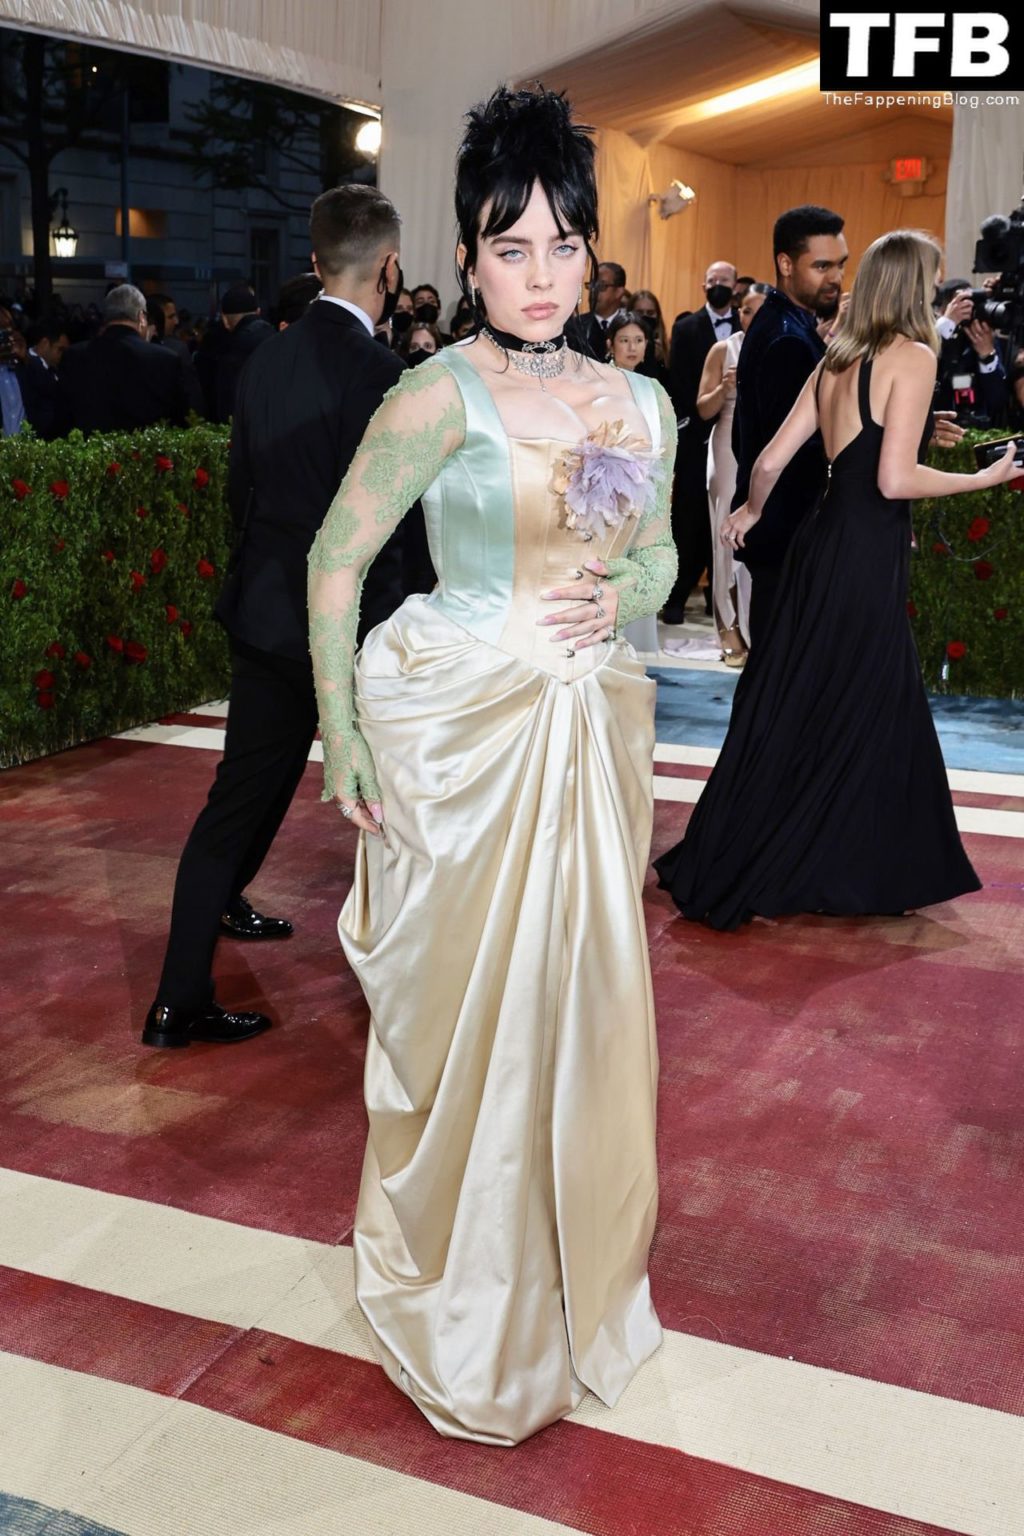 Billie Eilish Sexy The Fappening Blog 52 1024x1536 - Billie Eilish Showcases Nice Cleavage at The 2022 Met Gala in NYC (155 Photos)